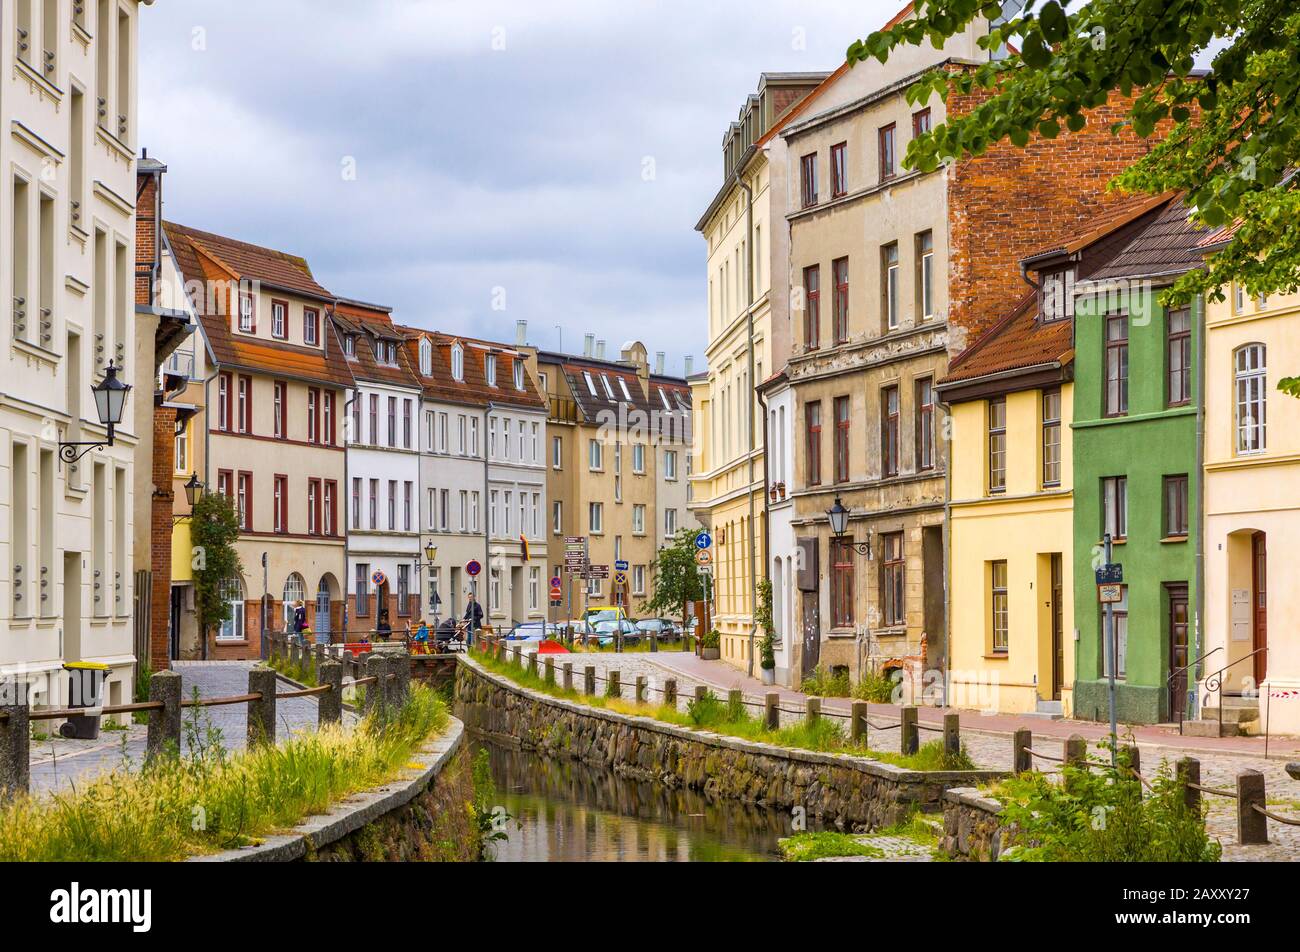 On the streets of Wismar old town. Colorful houses along the canal of Grube river, Wismar city, Mecklenburg-Vorpommern state, Germany Stock Photo